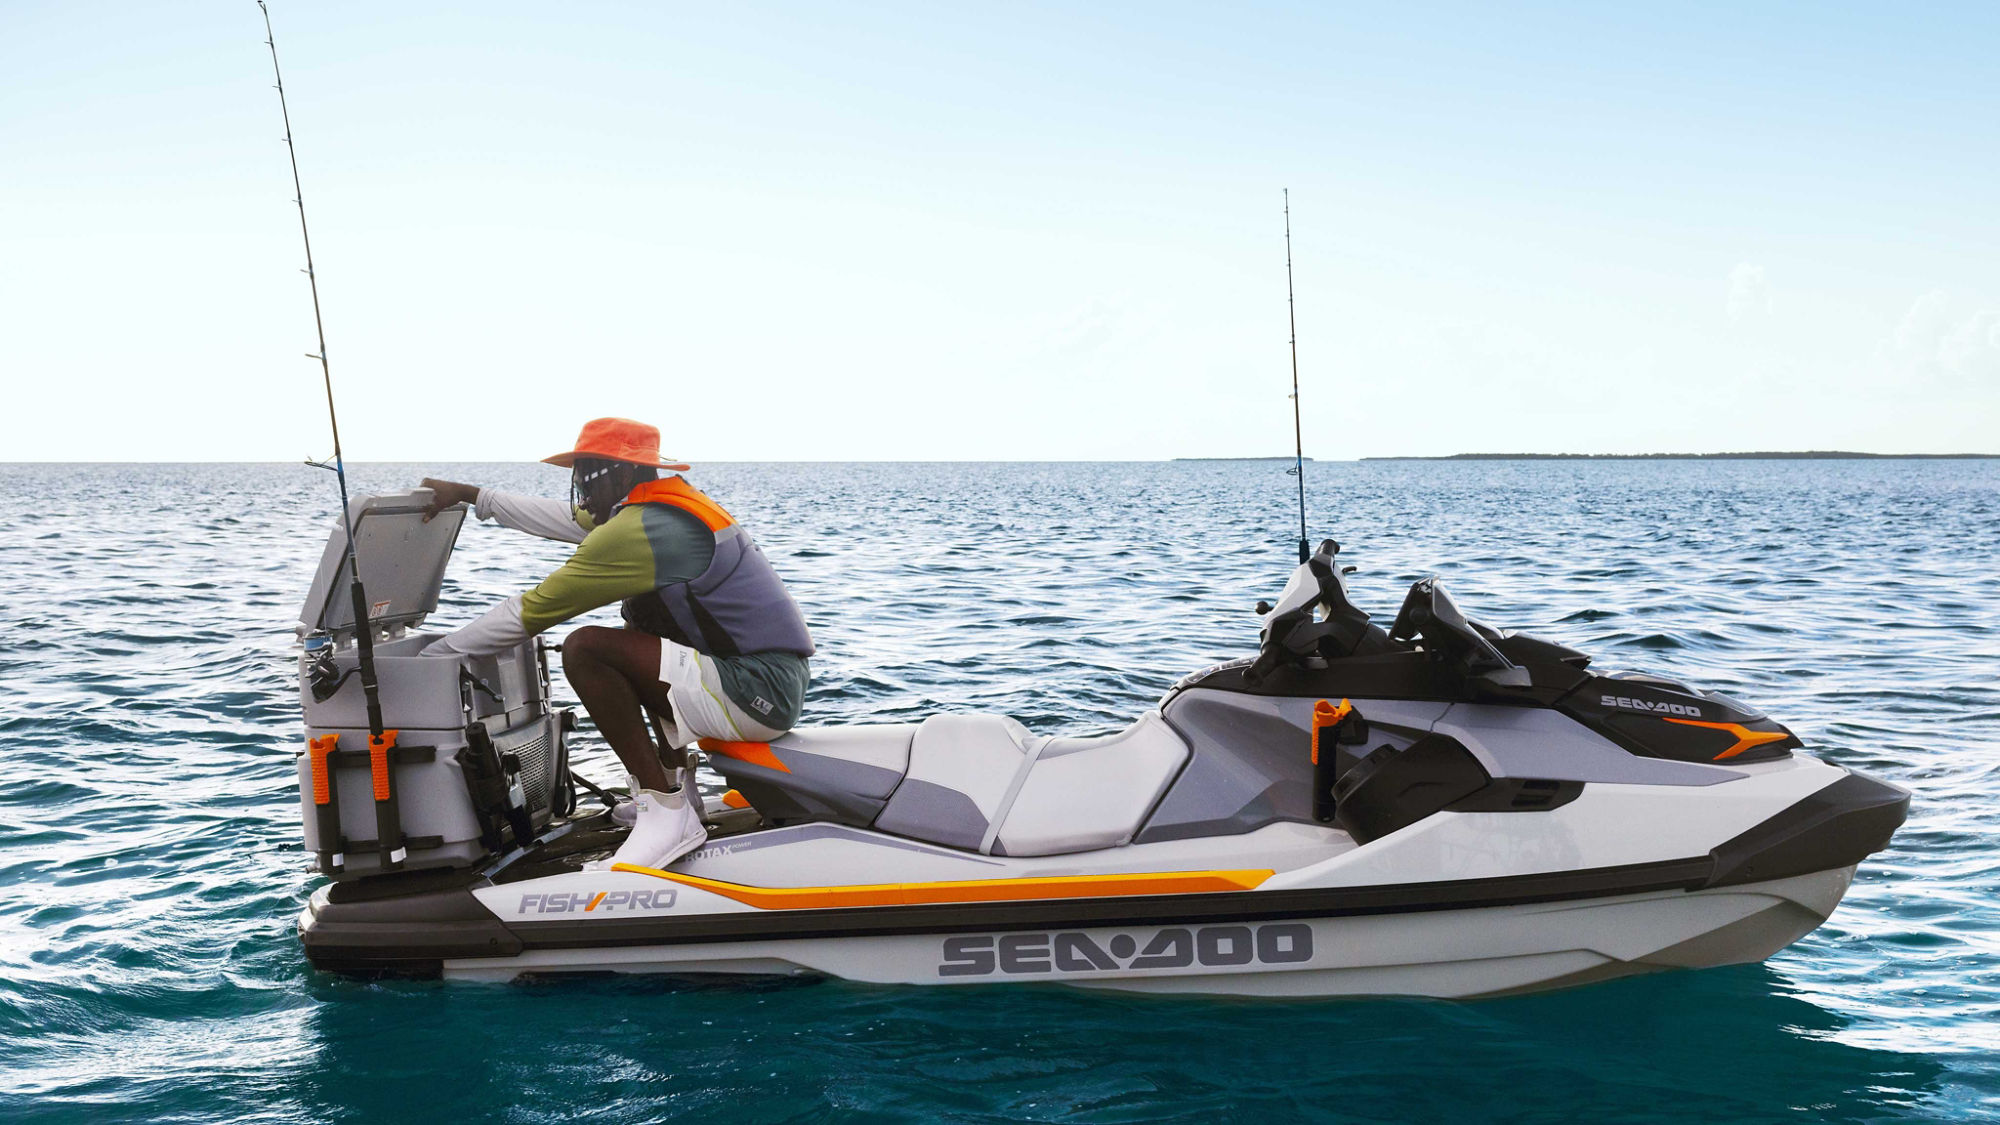 Men reaching for his LinQ cooler on a Sea-Doo FishPro Trophy